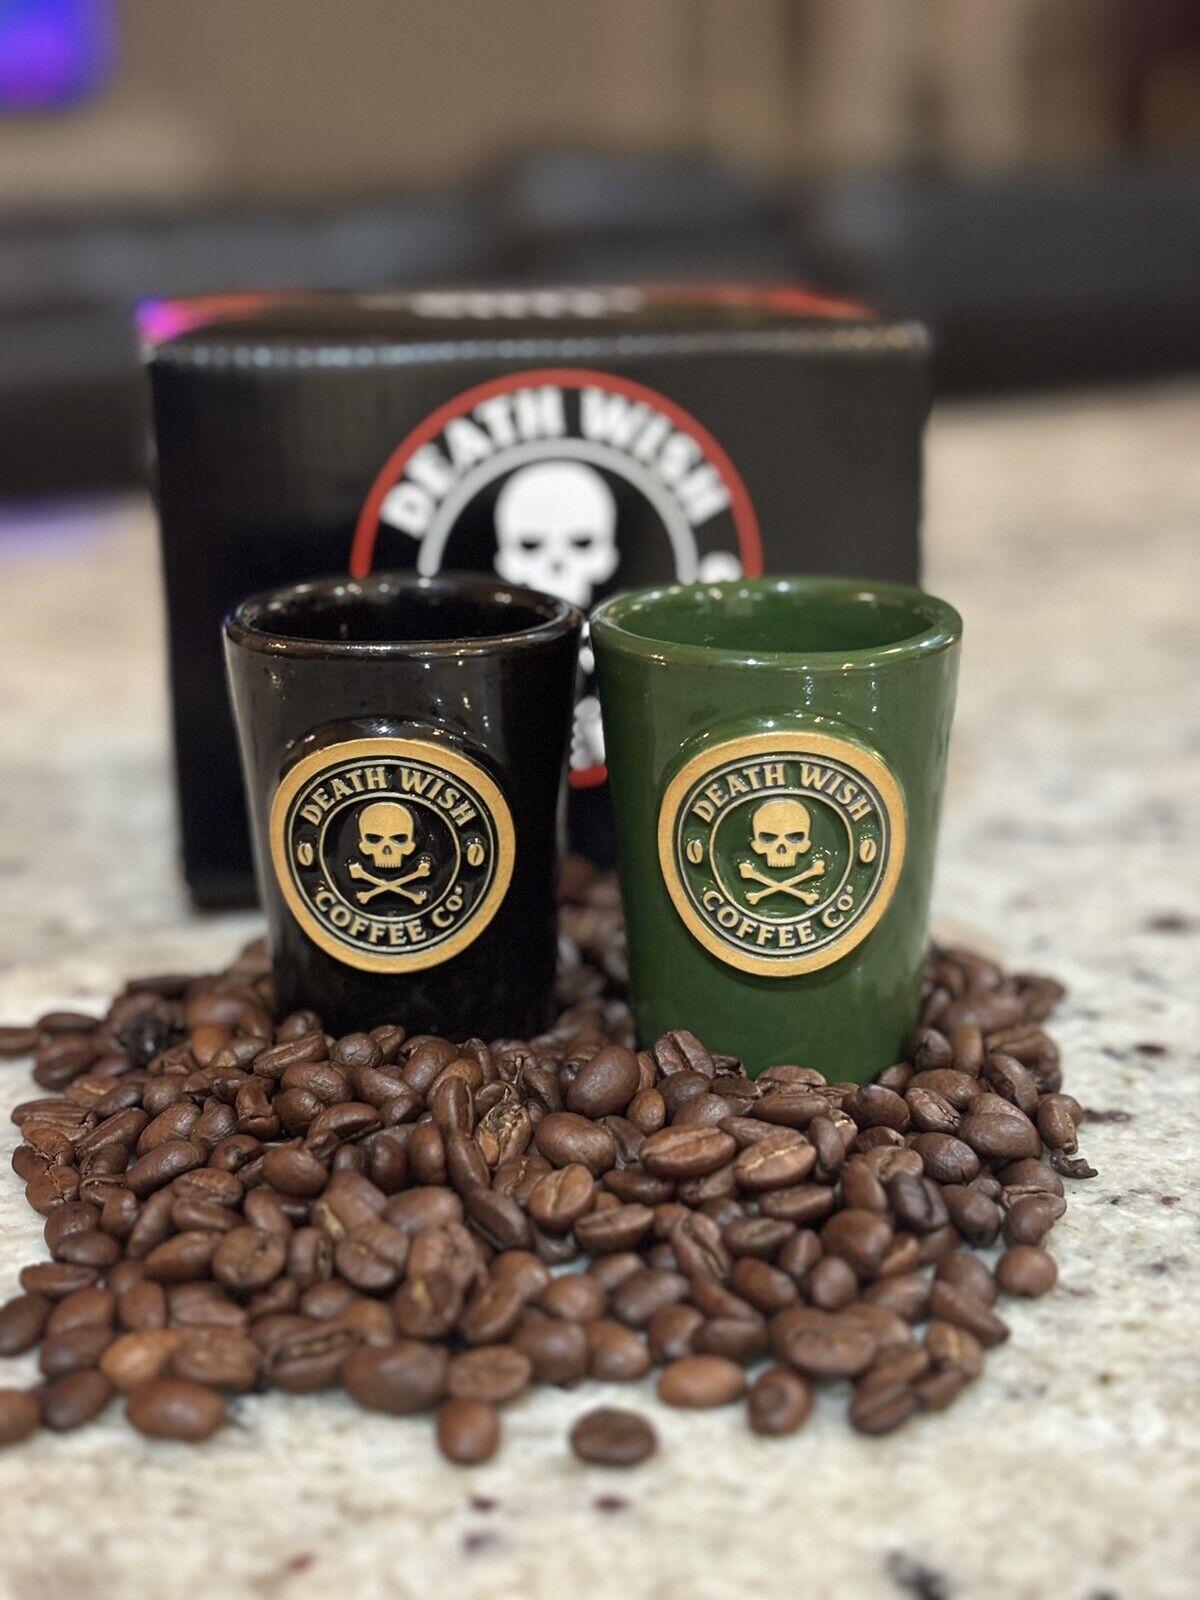 DEATH WISH COFFEE CO.  SHAMROCK SHOT GLASS SET FOR ST. PATRICK'S DAY   RARE